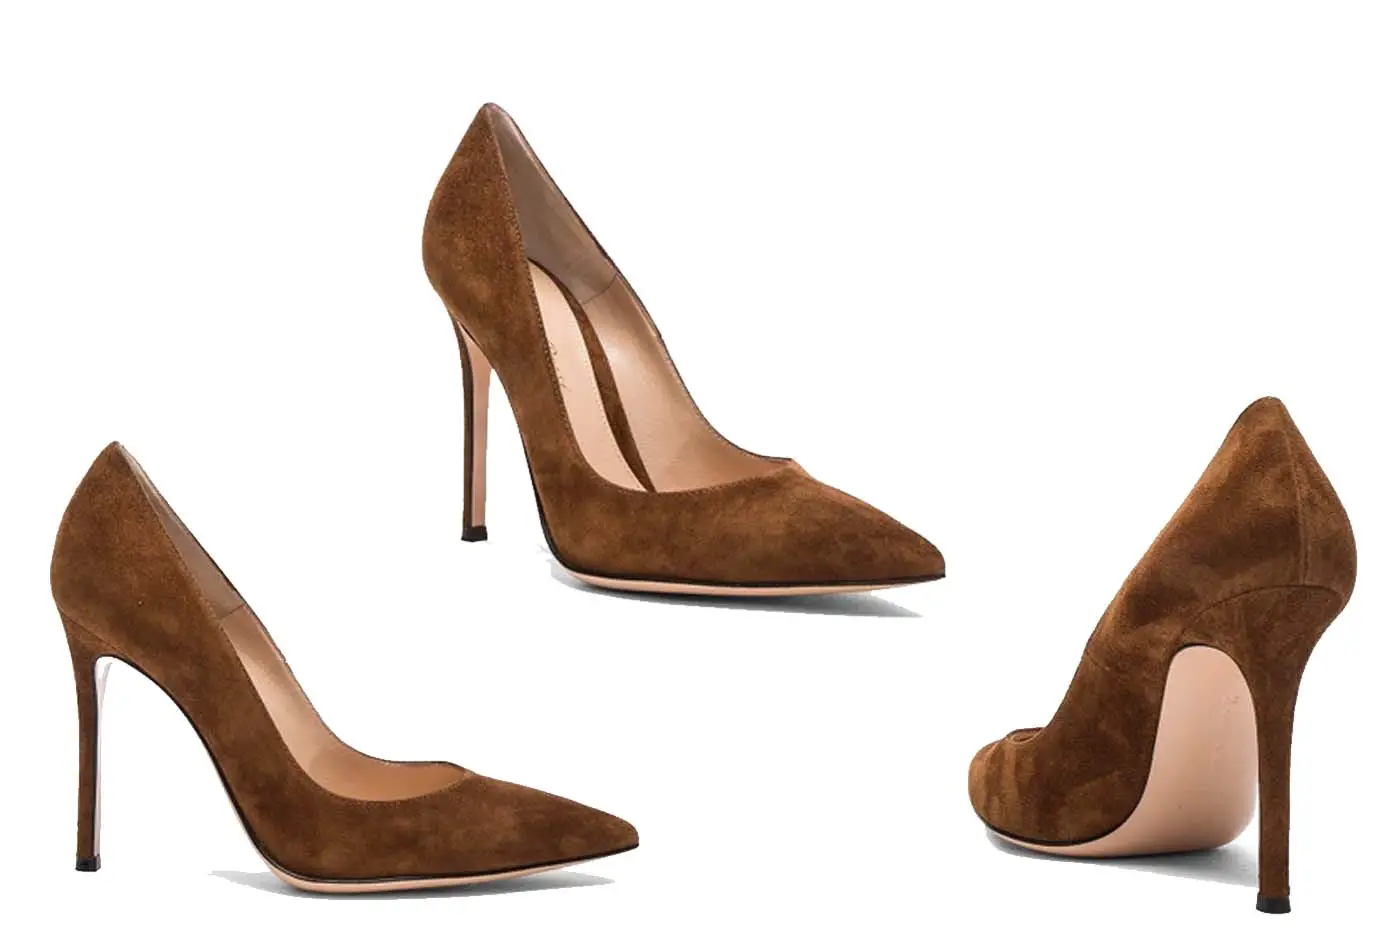 The Princess of Wales wore Gianvito Rossi Gianvito 85 Brown Pumps